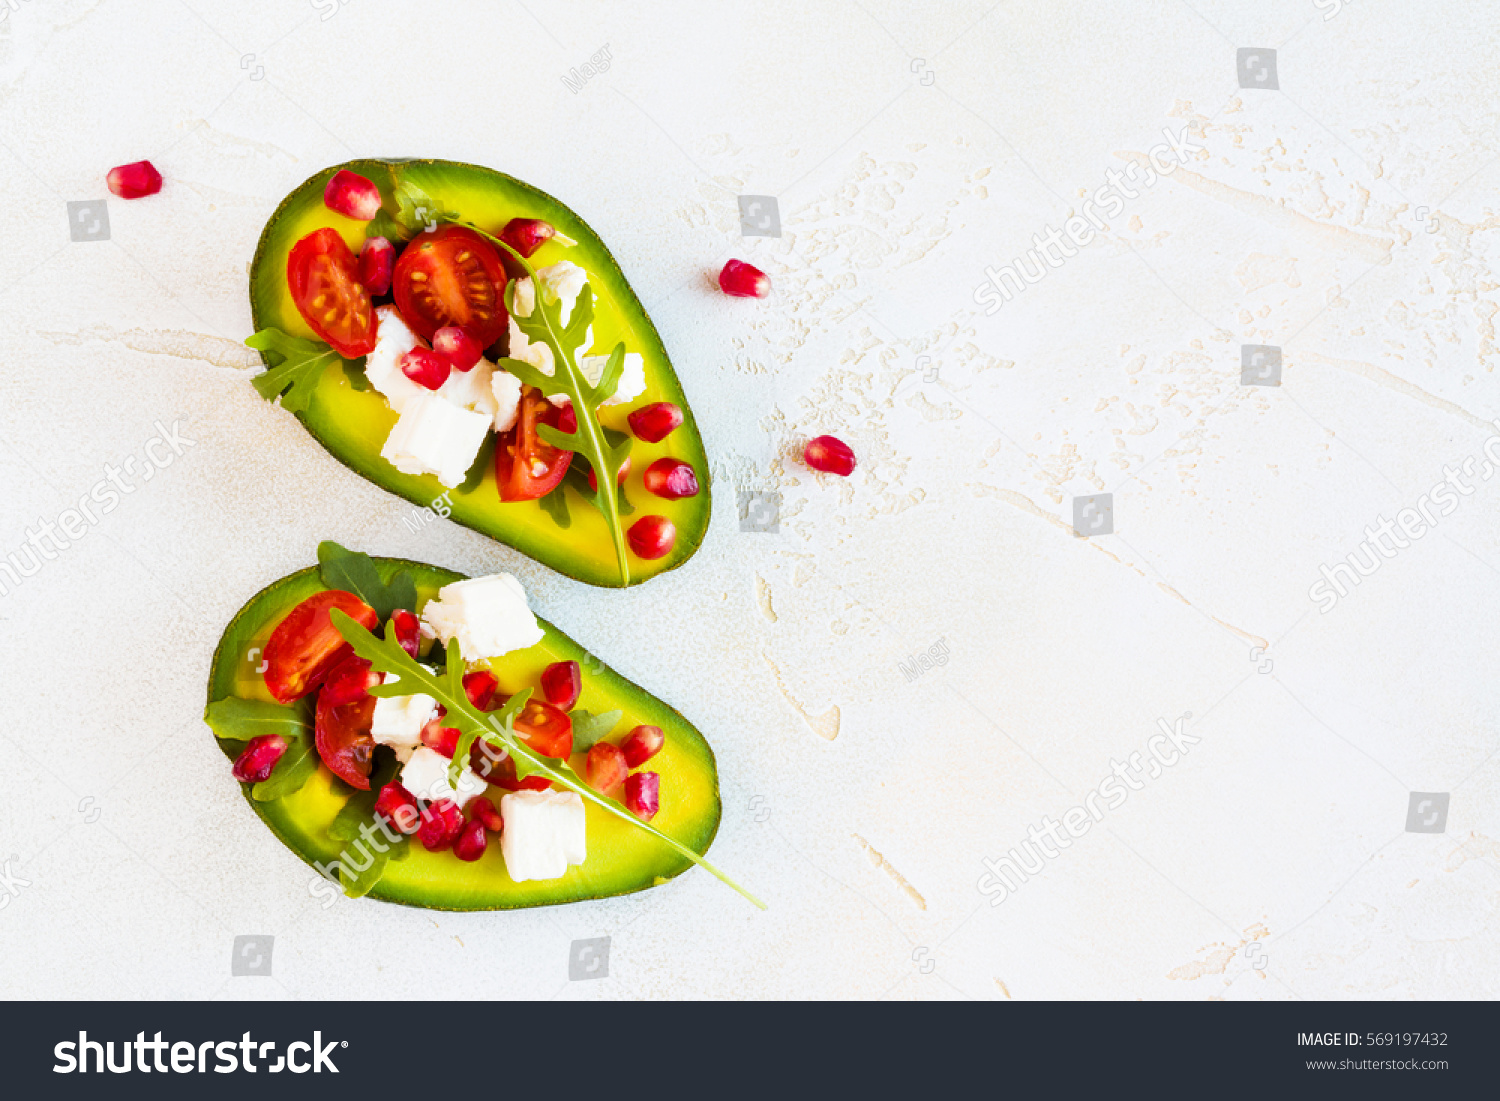 Healthy organic vegetarian diet food, avocado with pomegranate seeds, feta cheese, arugula leaves and cherry tomatoes on the table, top view. #569197432